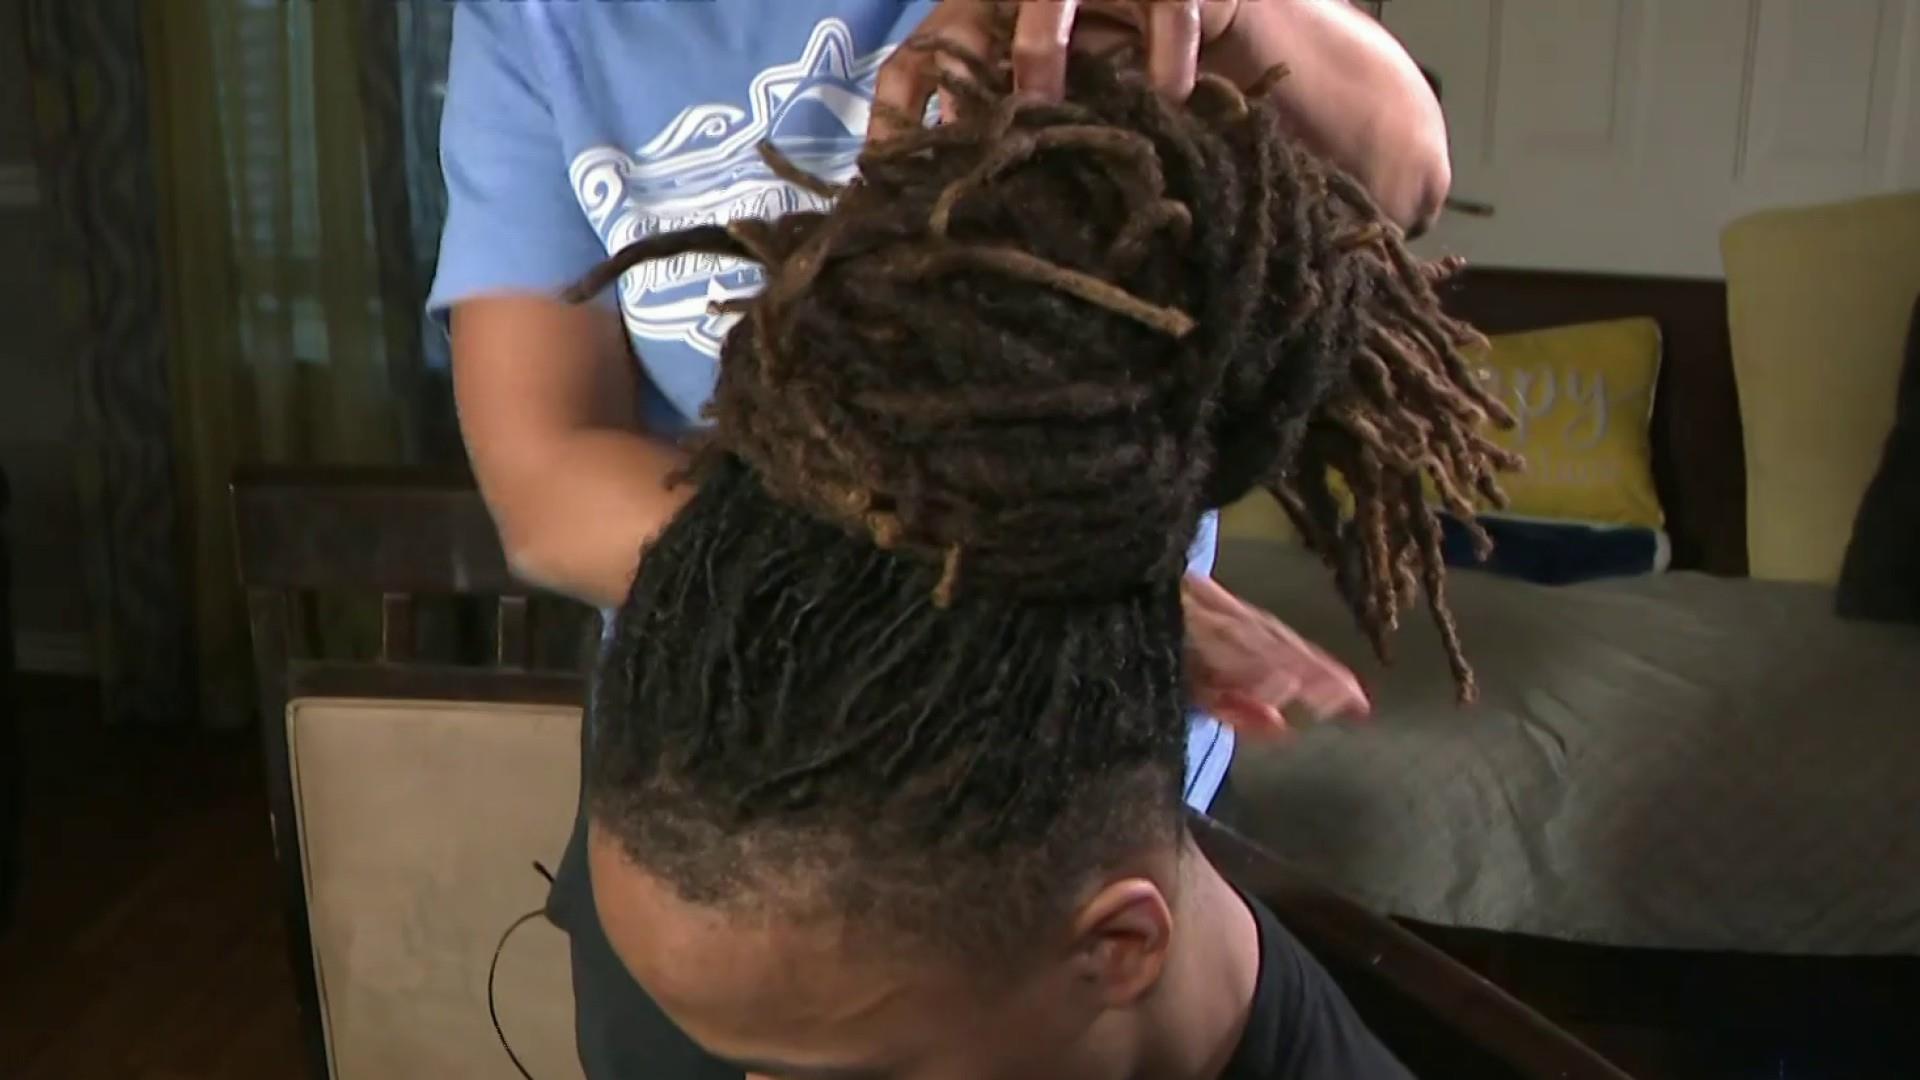 Second Black Texas Teen Told By School To Cut Dreadlocks According To His Mom